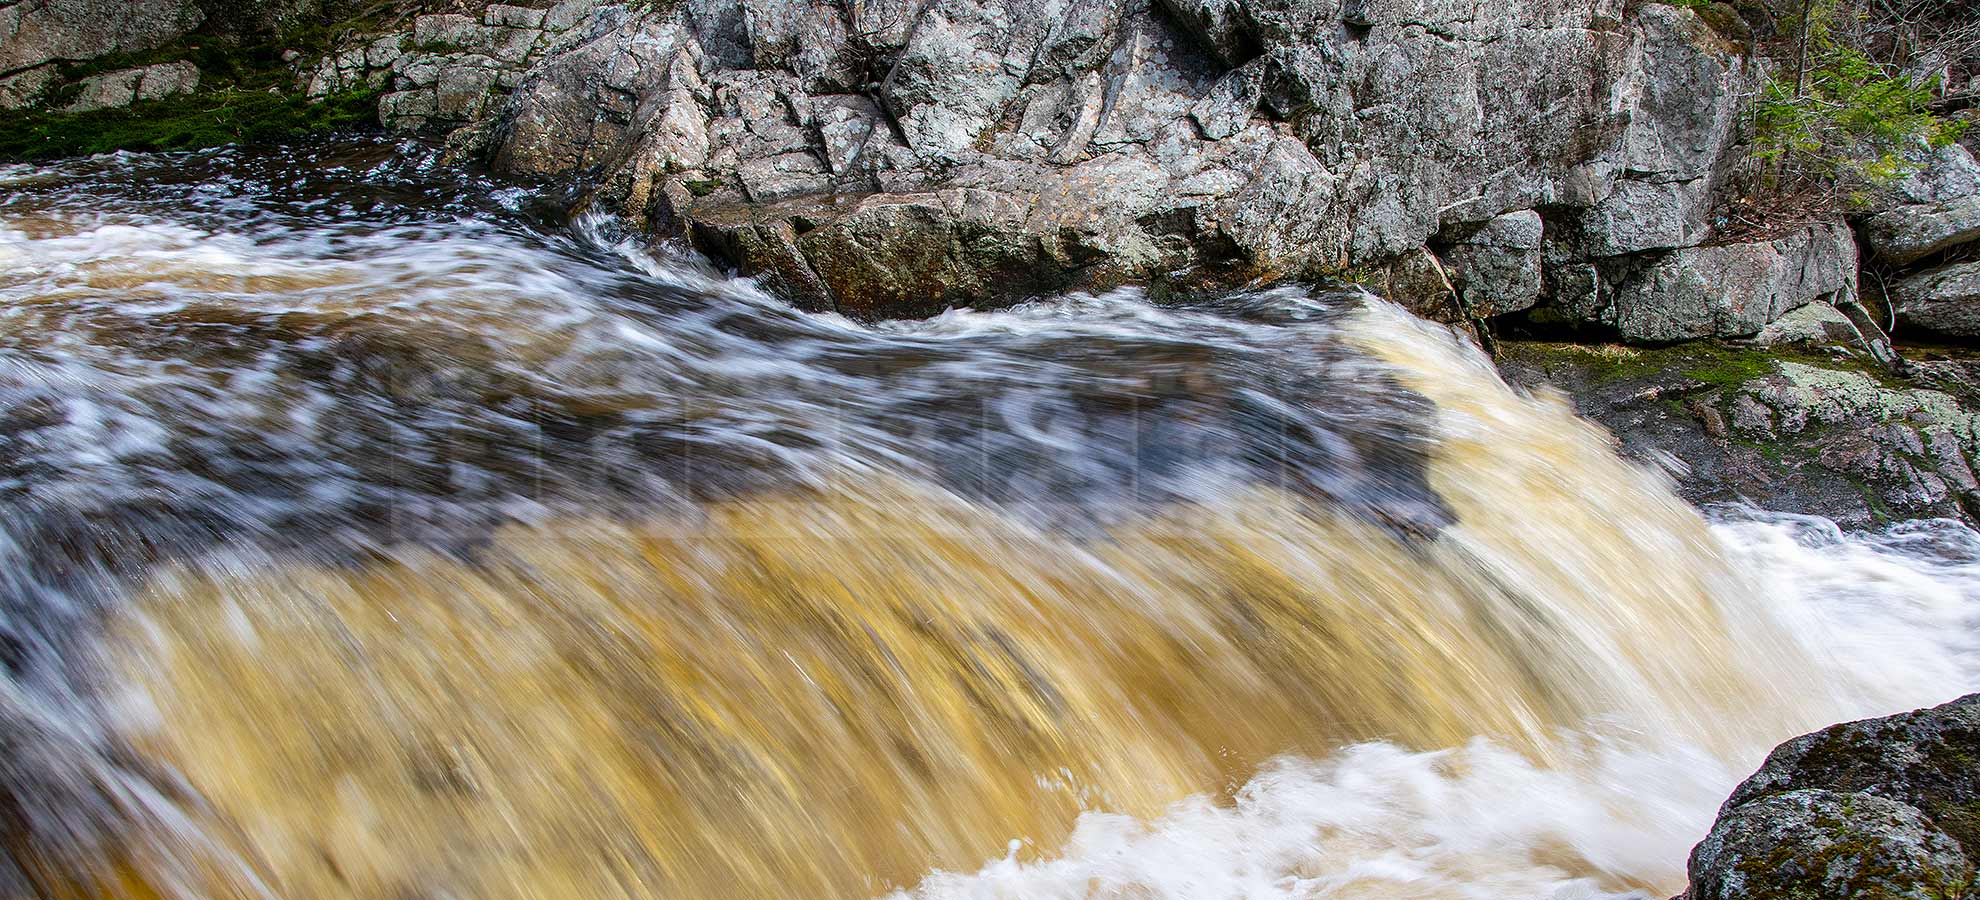 fast moving water at Millet Falls waterfall